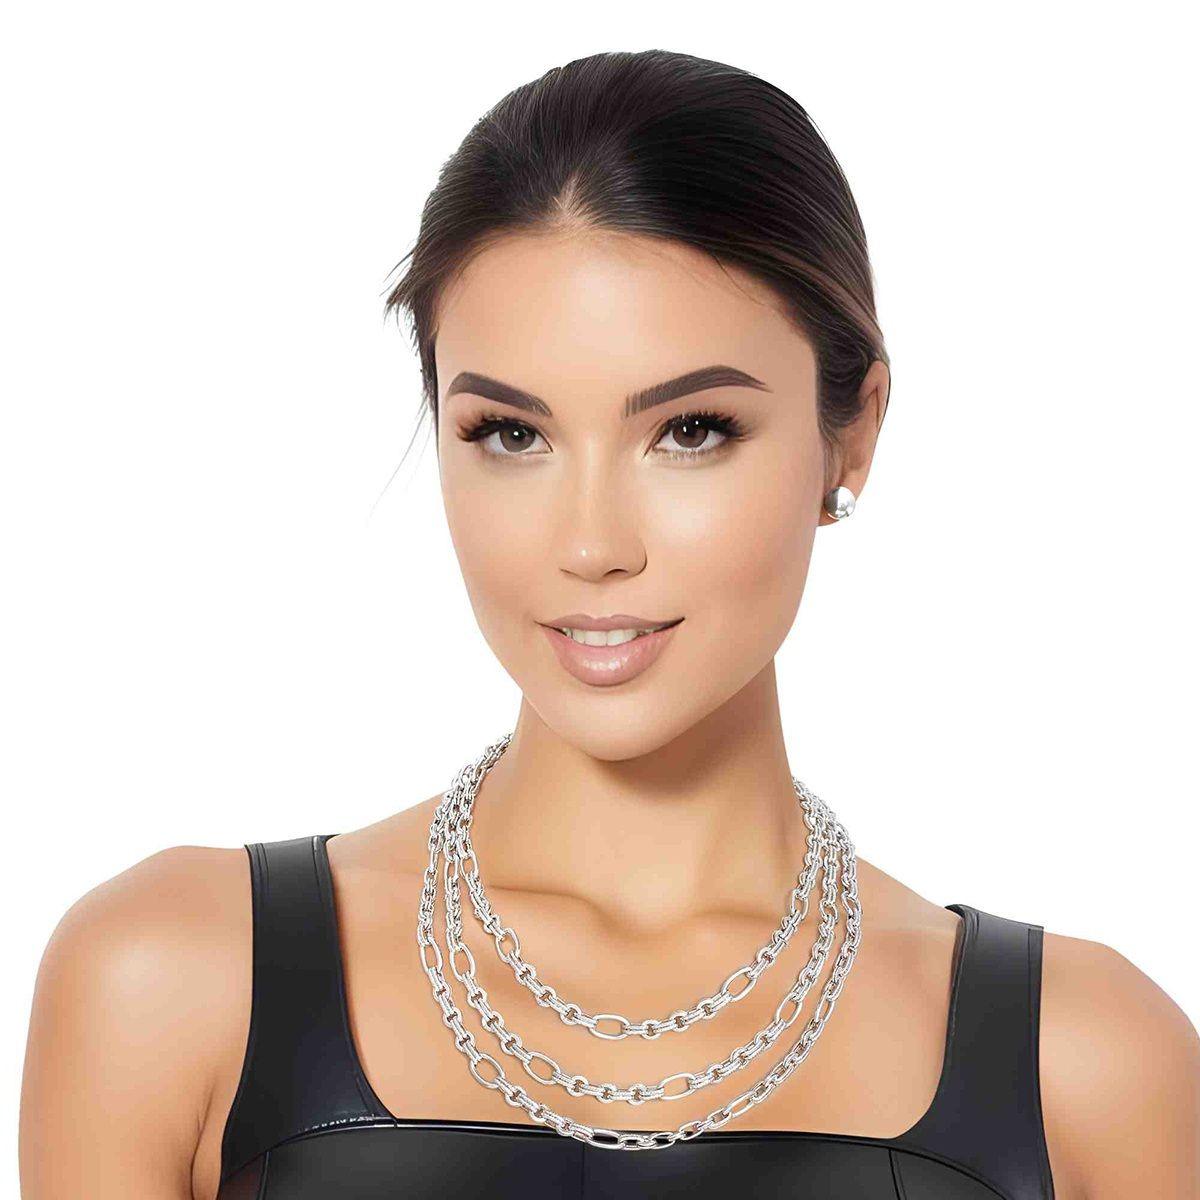 Stylish Silver Oval Links Necklace Set: Fashion Jewelry for Women